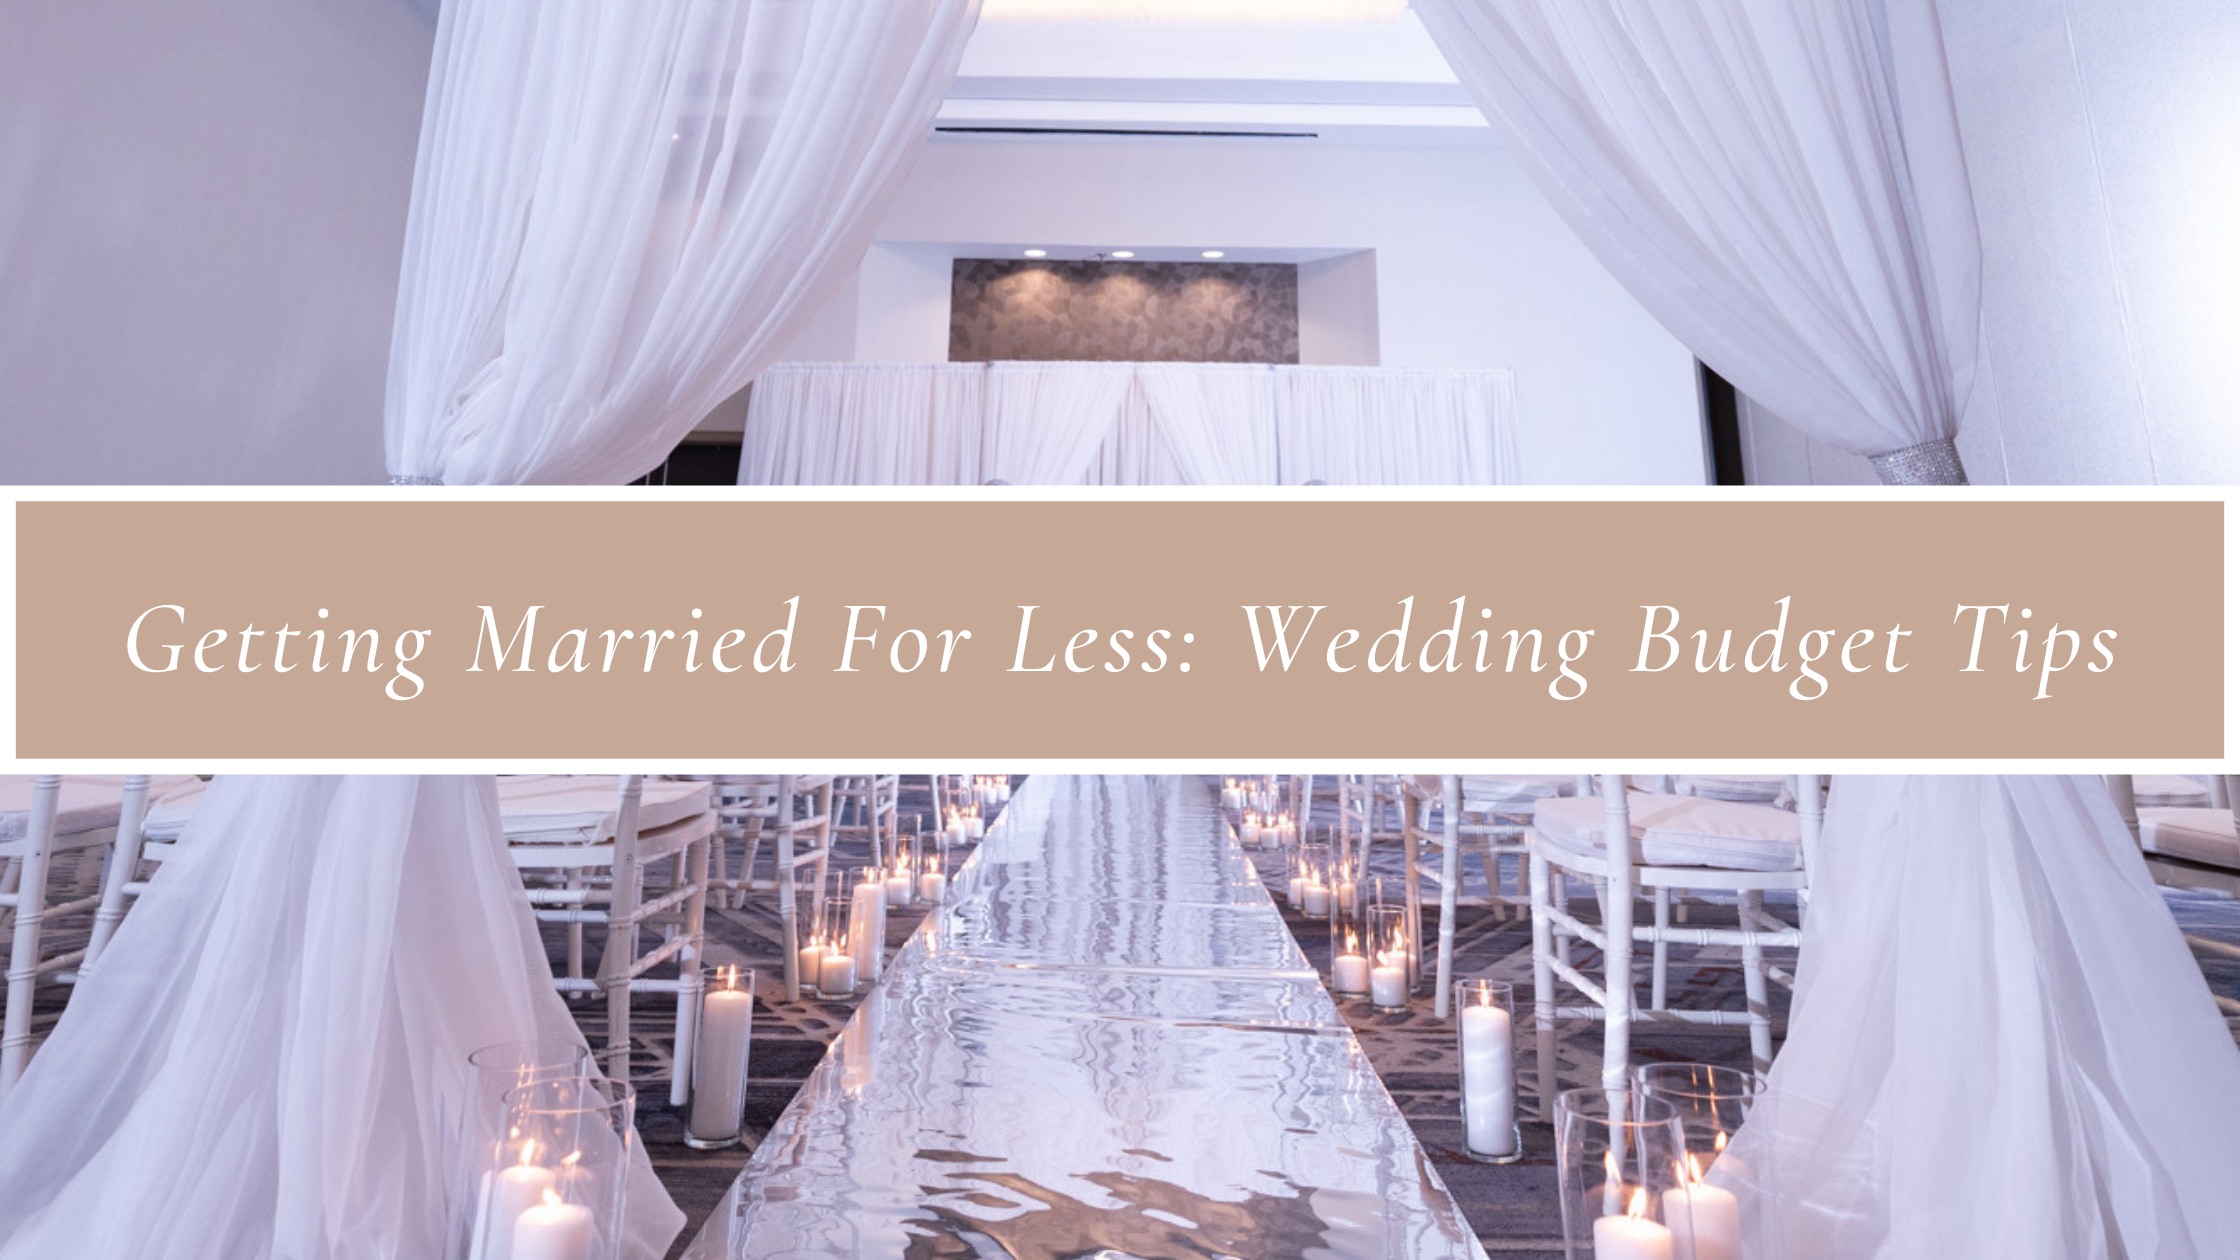 Getting Married For Less: Wedding Budget Tips